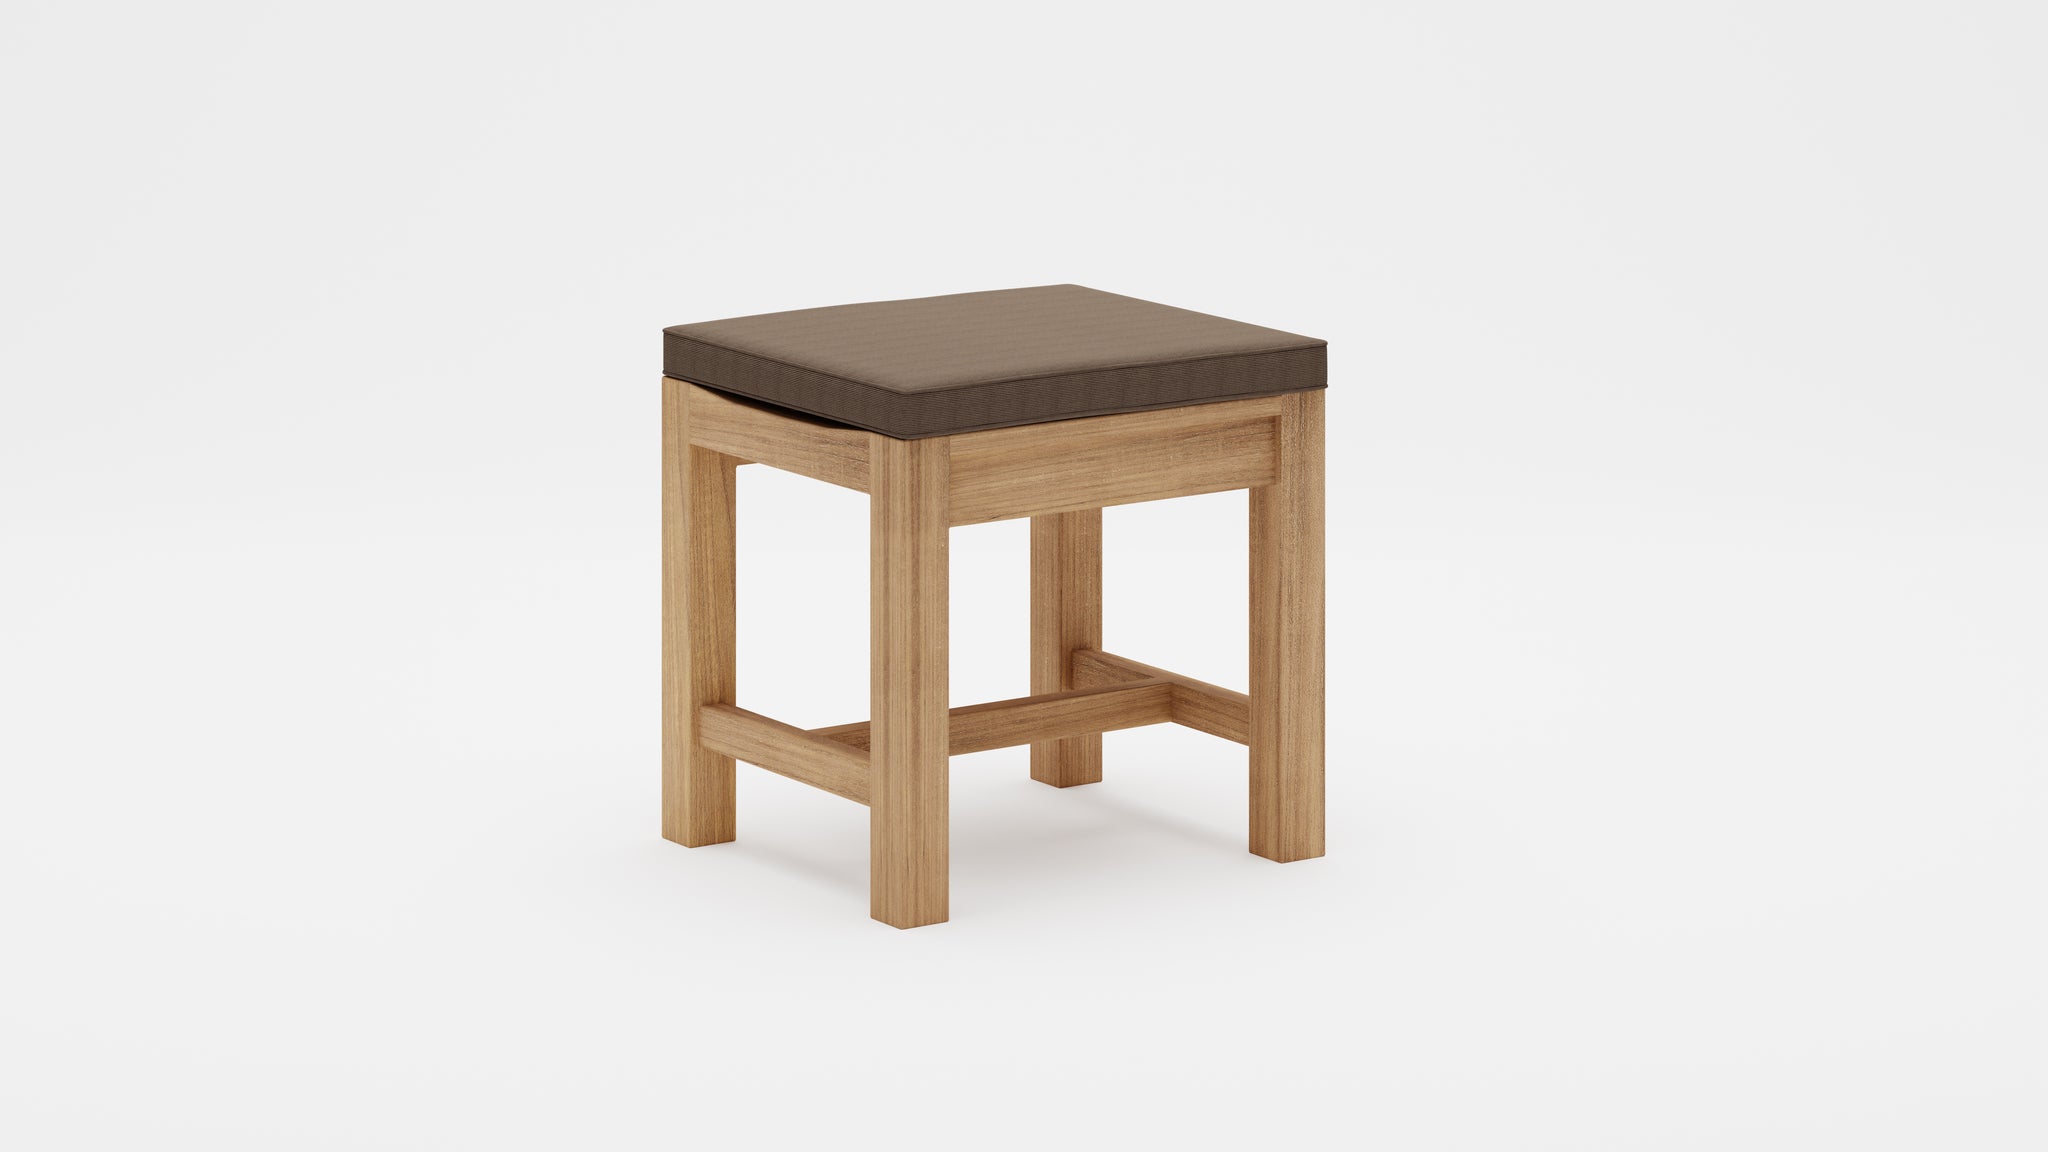 Backless Stool with Taupe Cushion